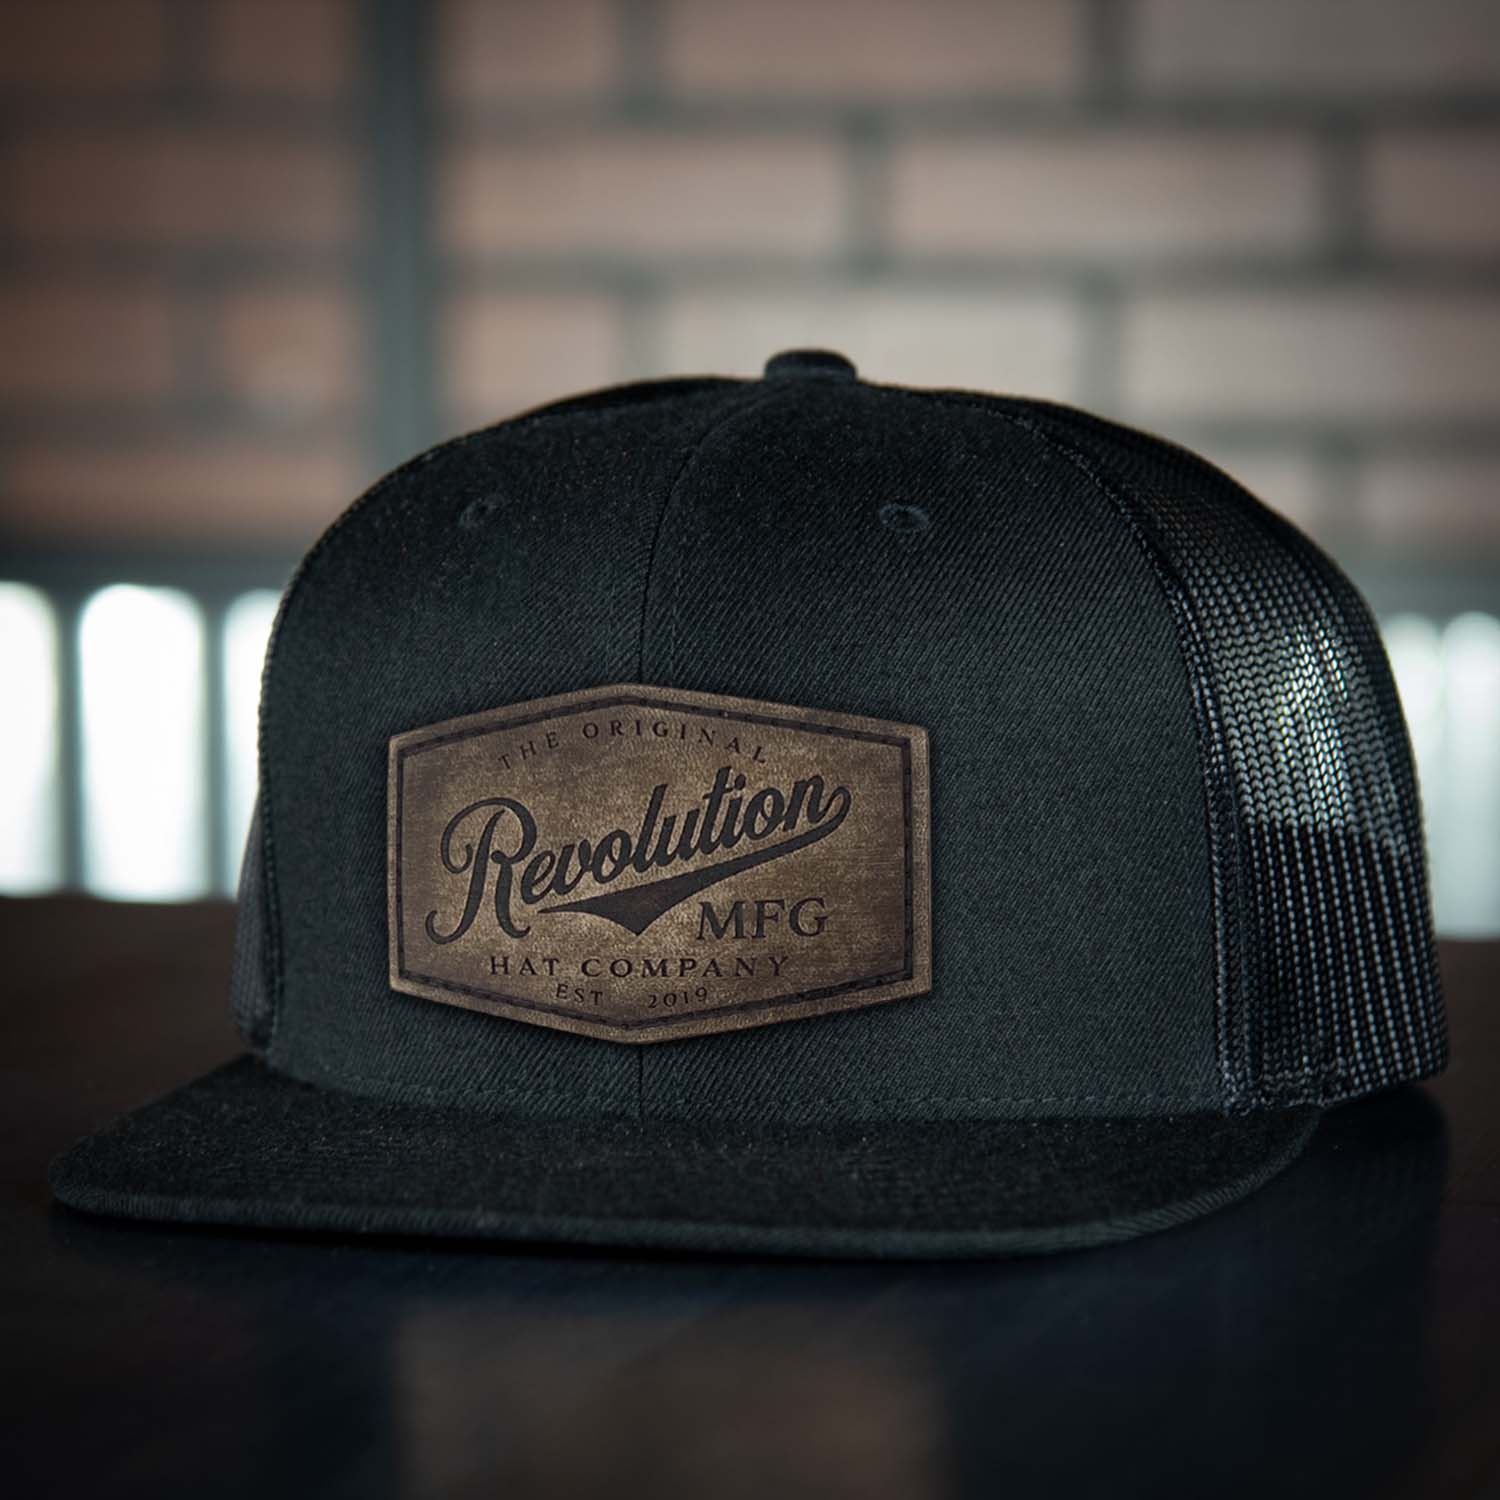 Revolution Hat Co Vintage full grain leather patch stitched on an all black 7 panel flat bill trucker hat